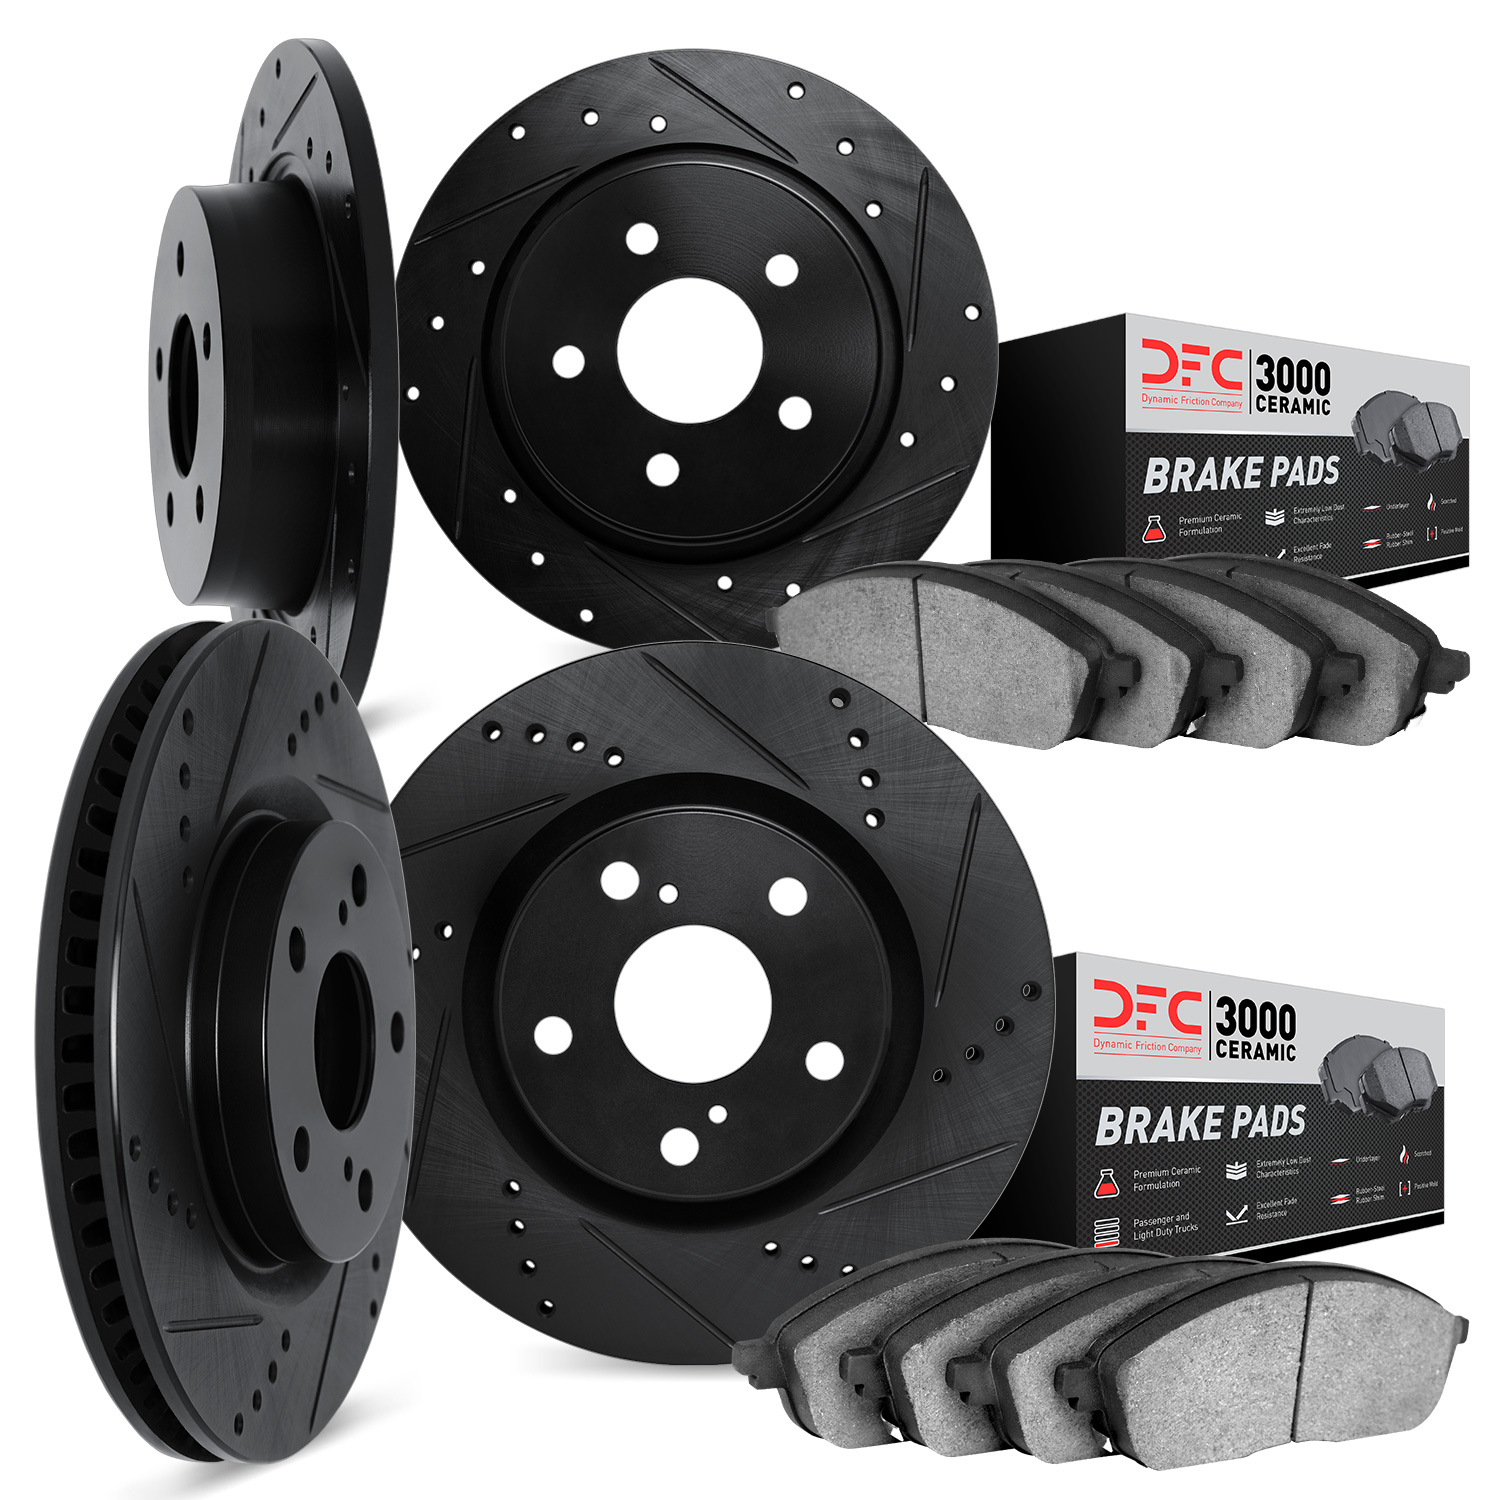 8304-31008 Drilled/Slotted Brake Rotors with 3000-Series Ceramic Brake Pads Kit [Black], 1982-1989 BMW, Position: Front and Rear